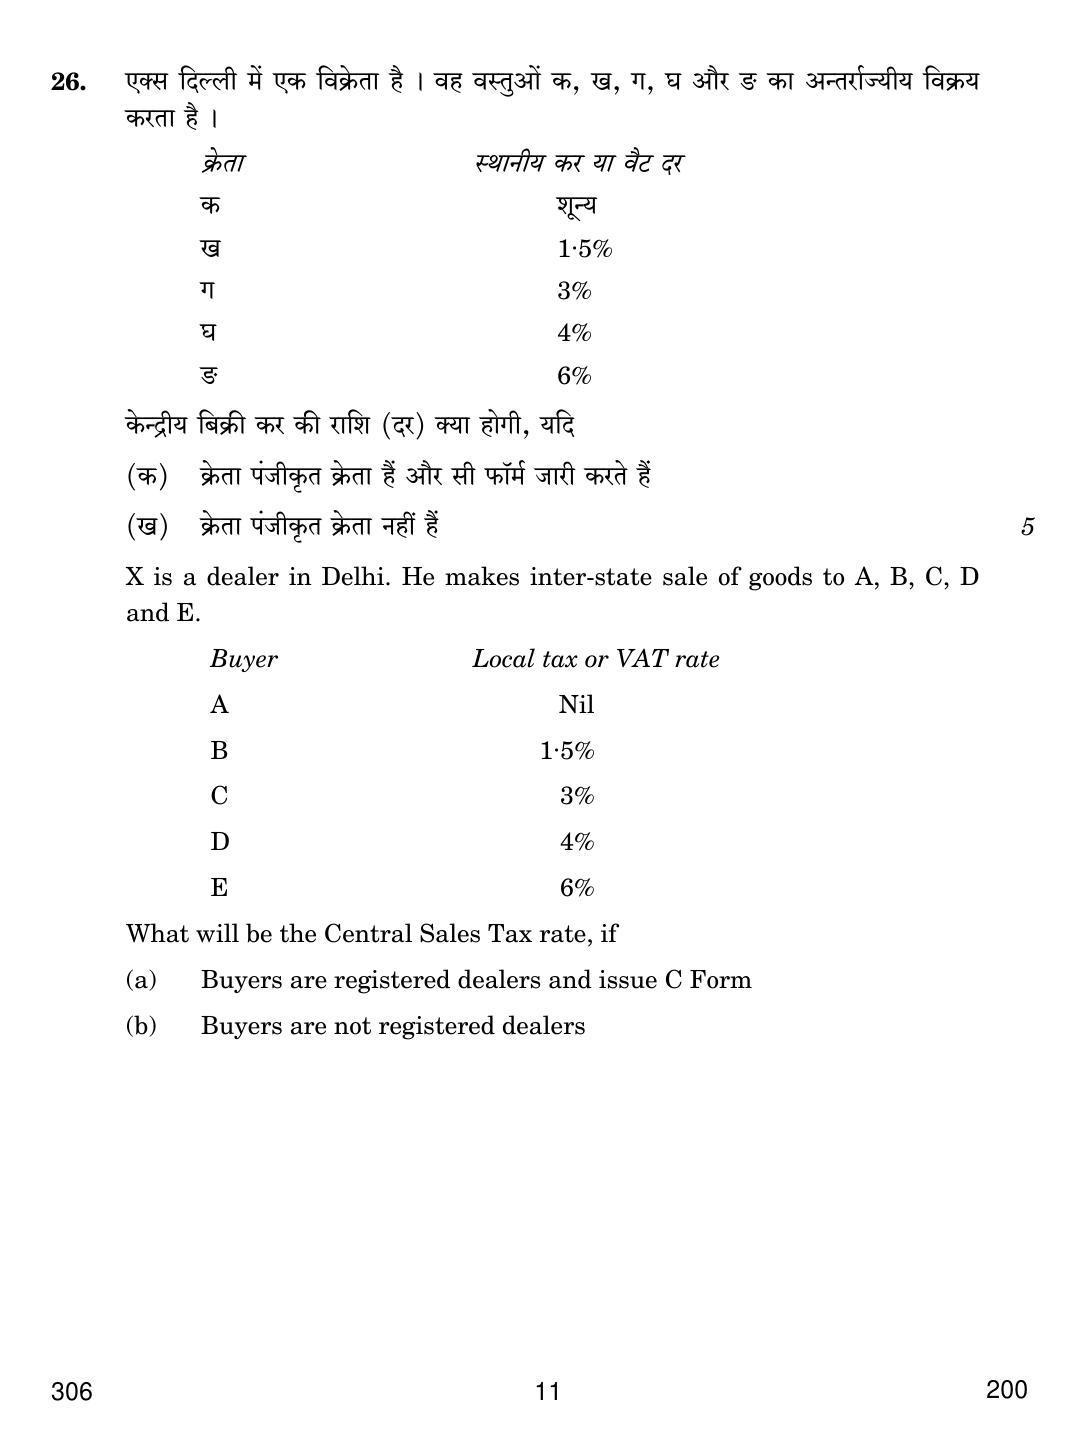 CBSE Class 12 306 TAXATION 2018 Question Paper - Page 11